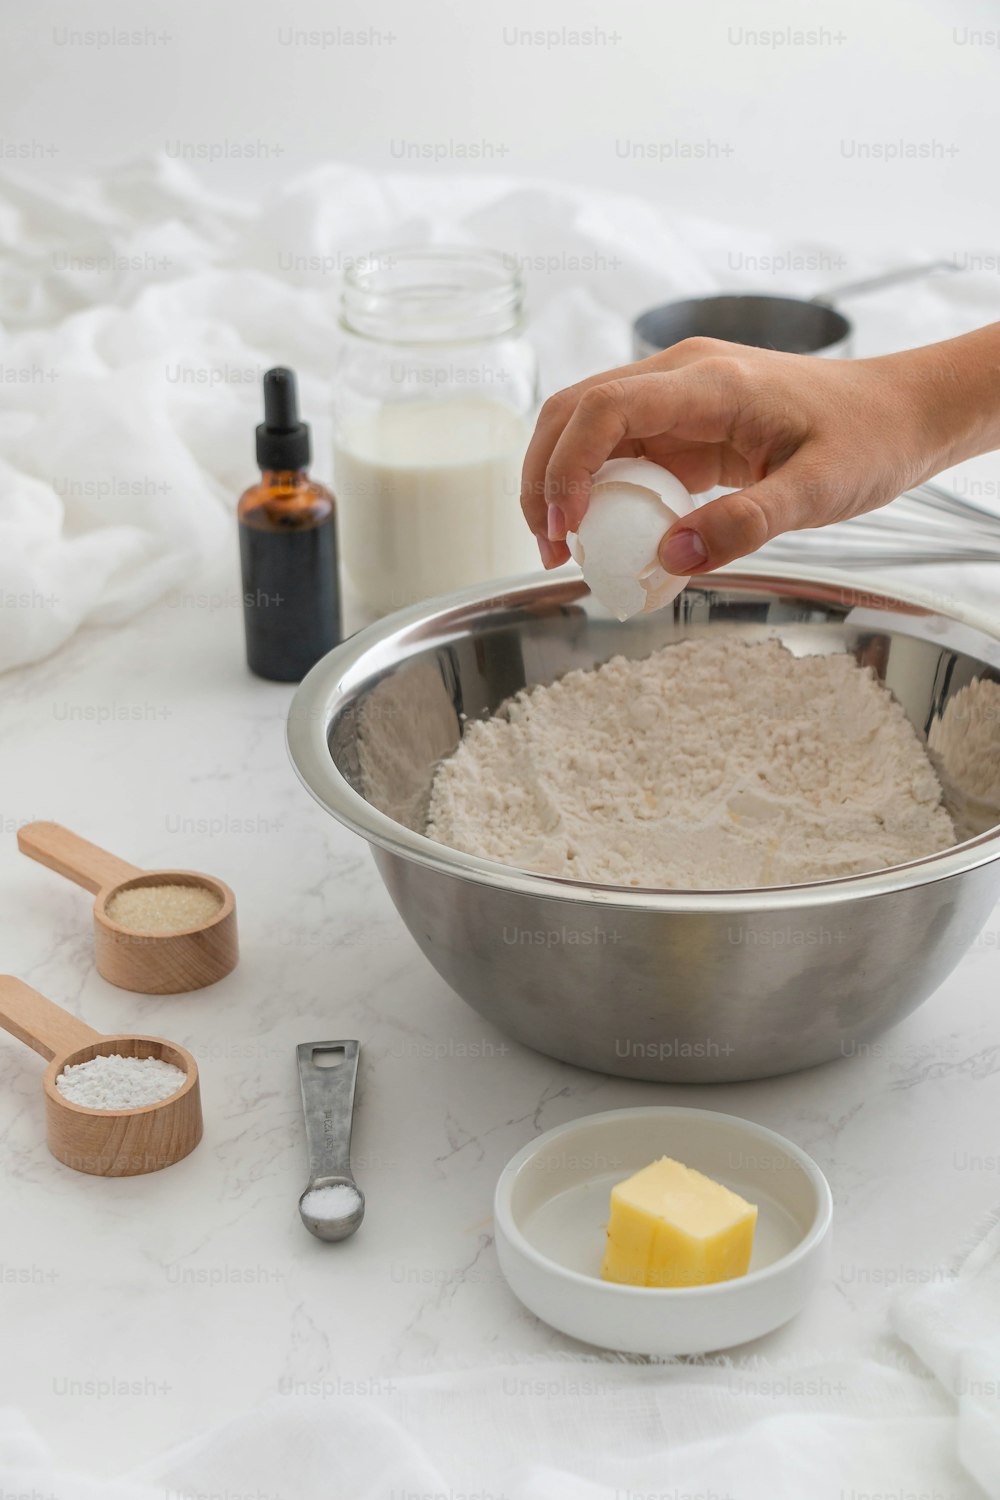 a person is mixing ingredients in a bowl